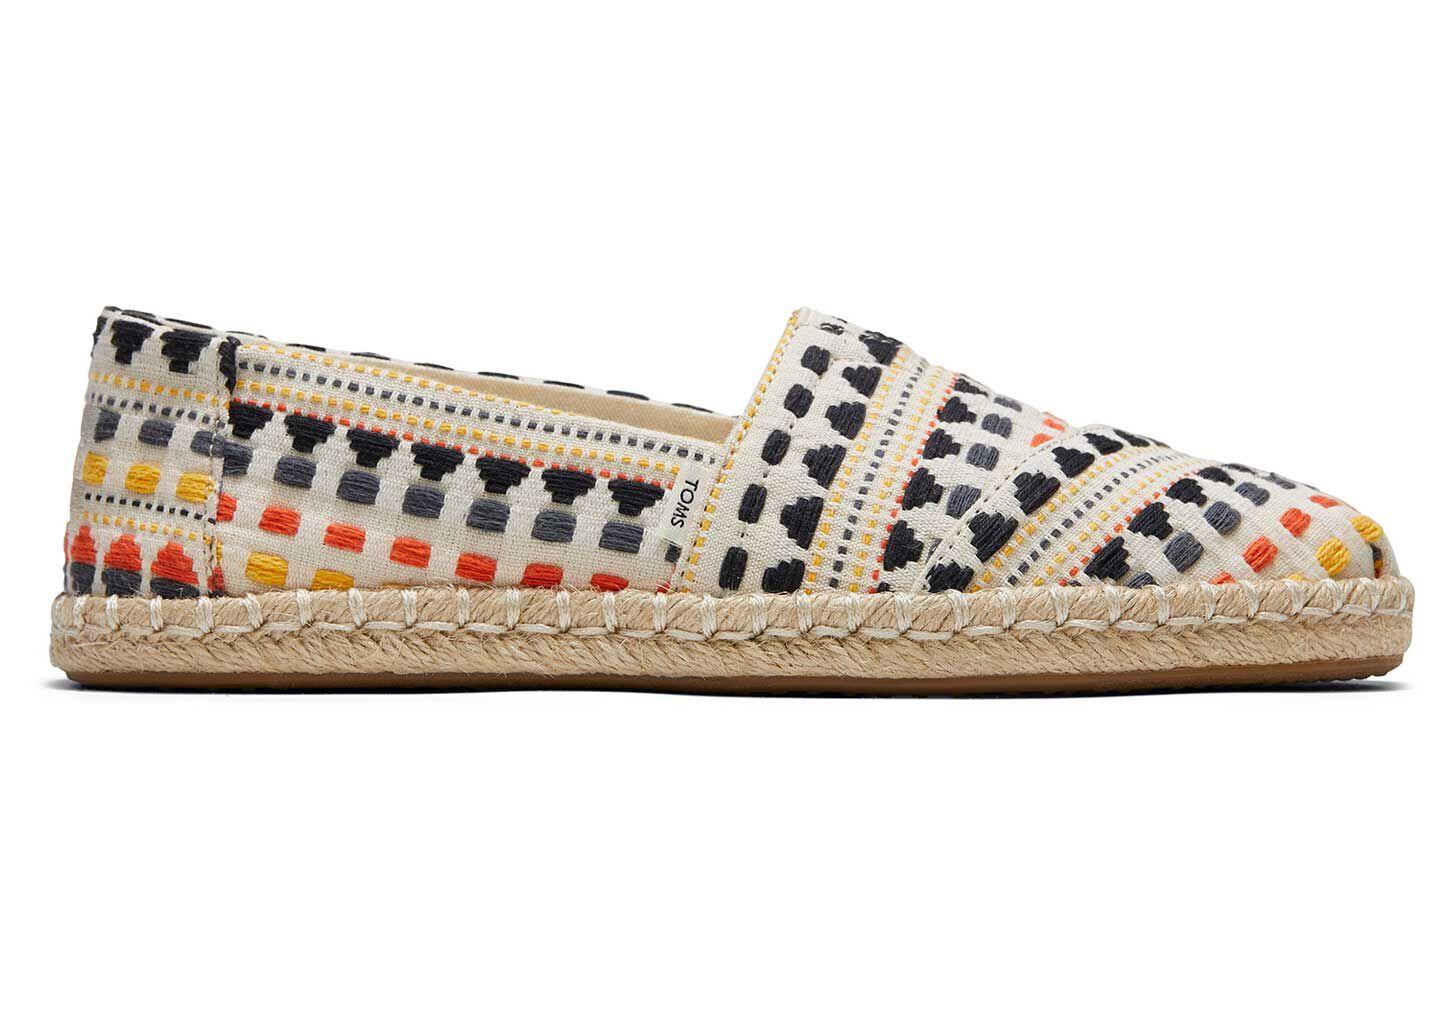 TOMS Woven Espadrille Womens Alpargata Slip On Shoe in Natural - Lyst